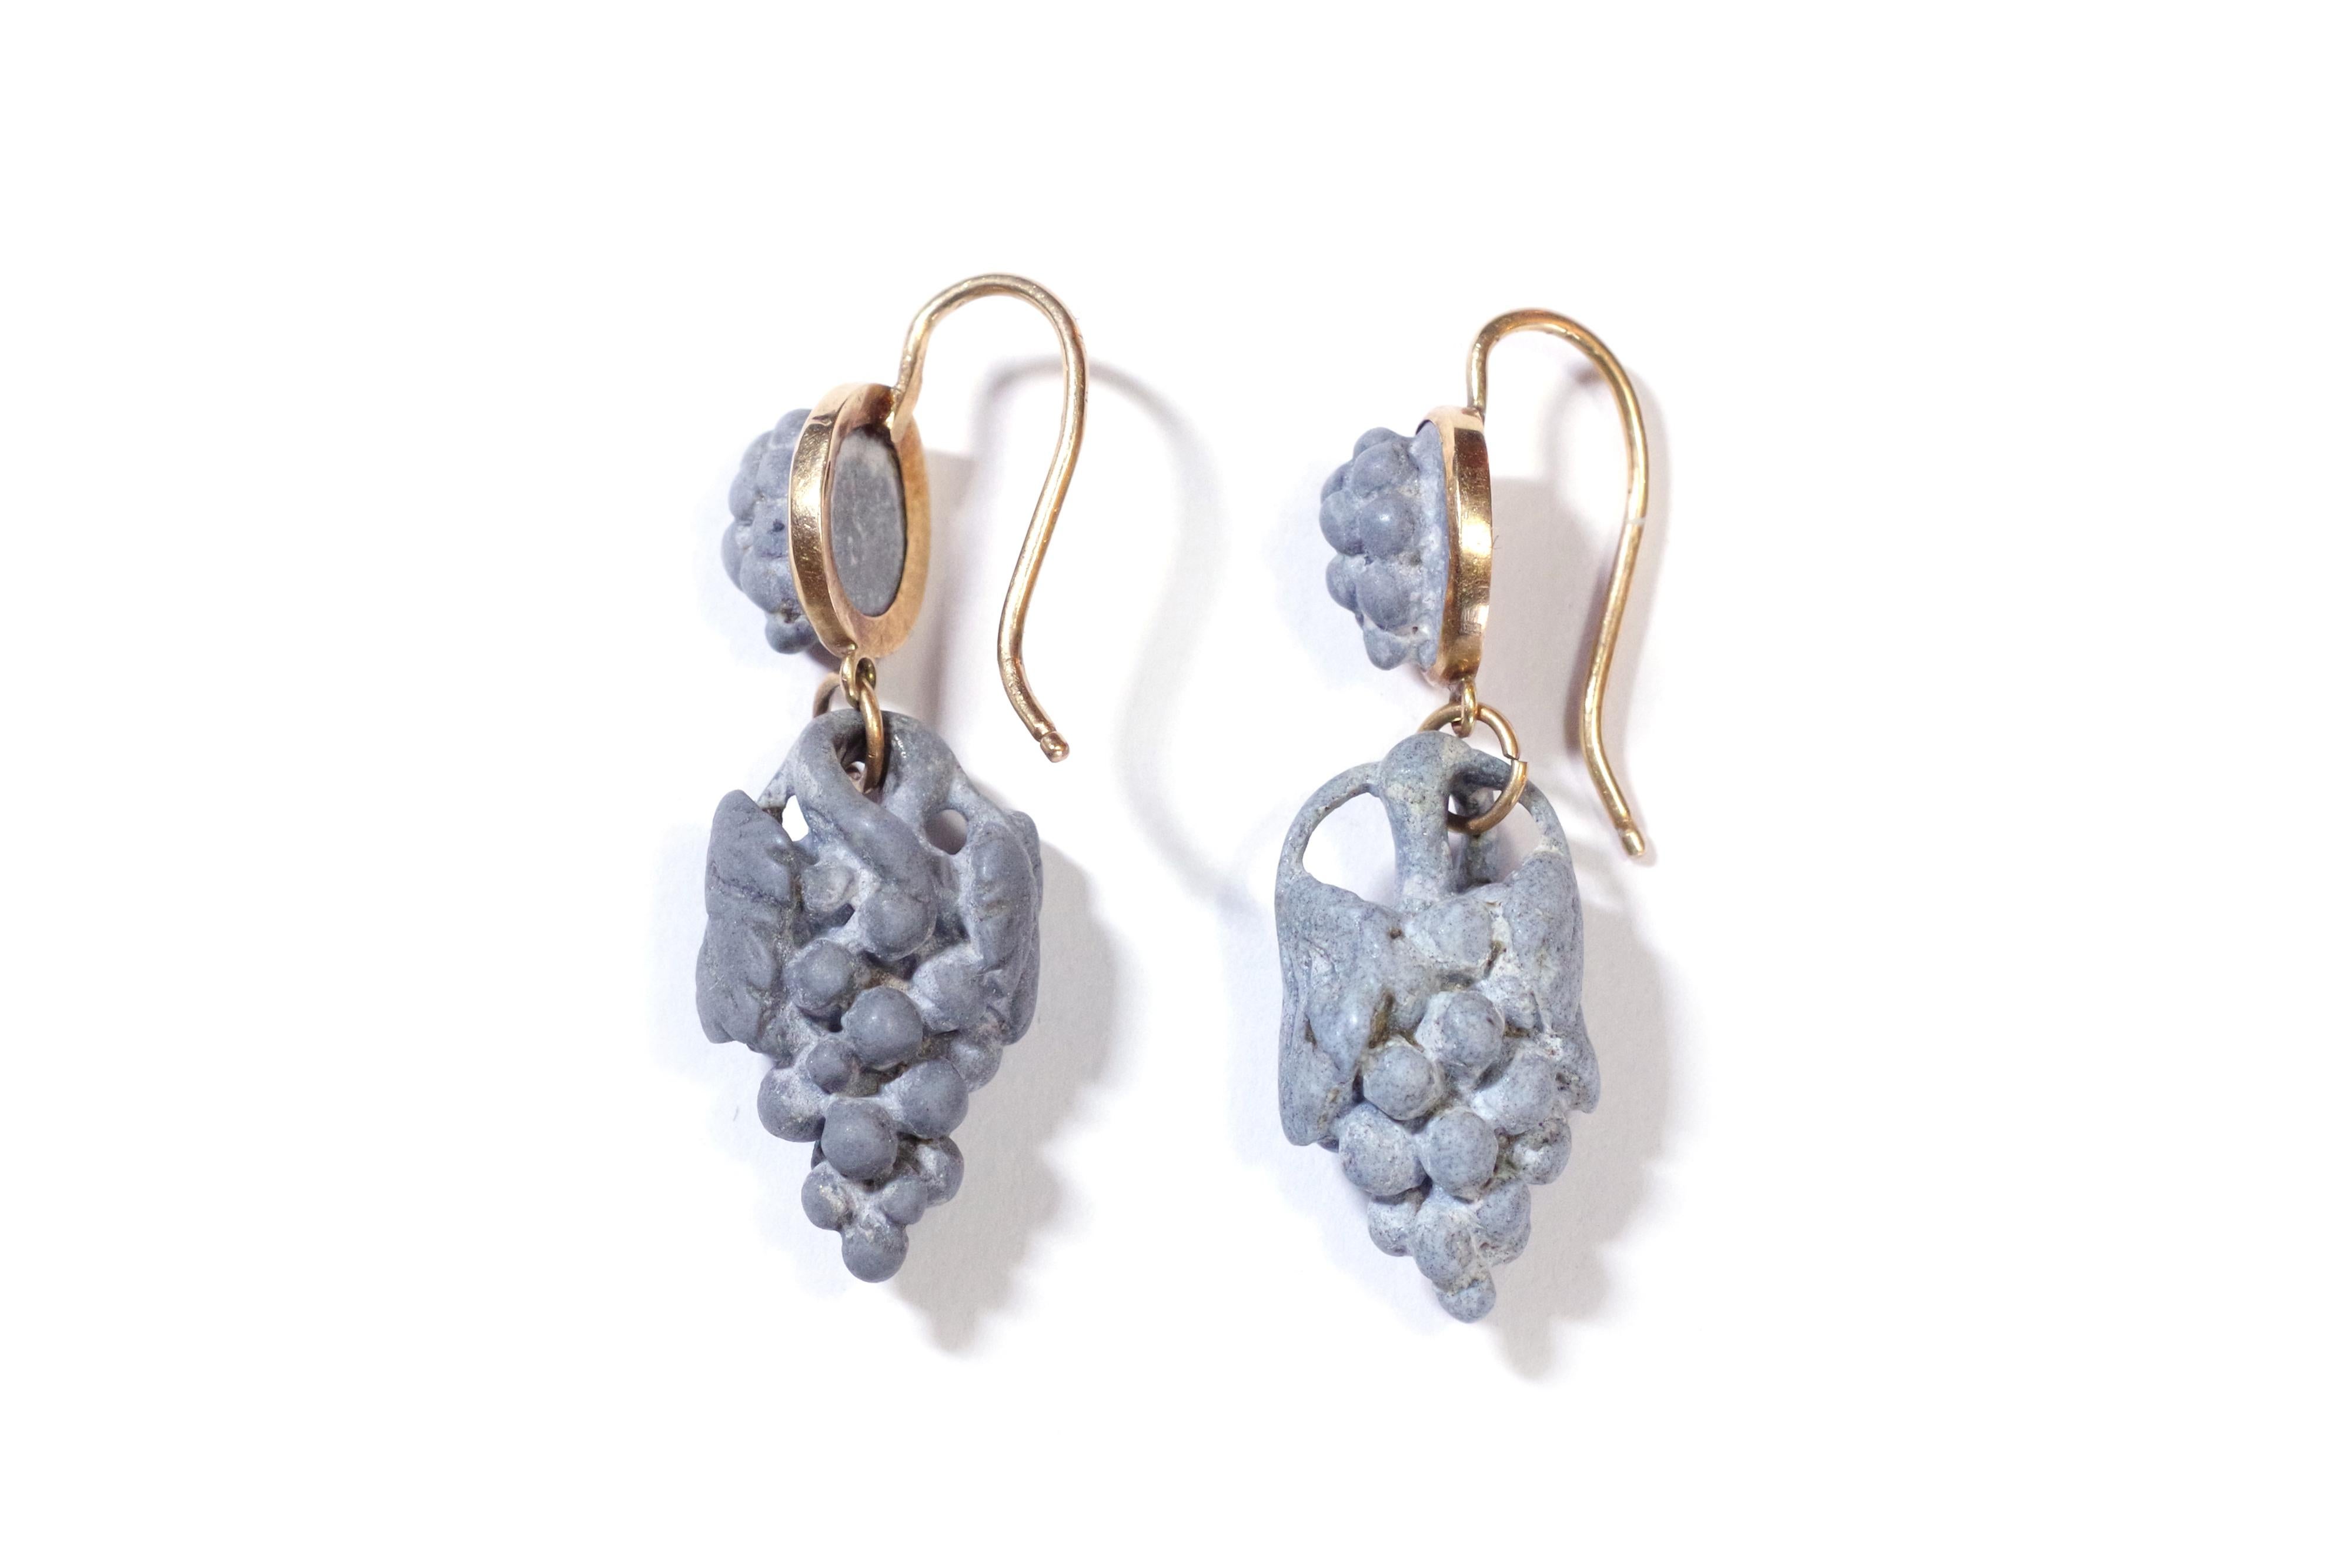 Antique lava stones earrings and rose gold 14 karats. The earrings are formed from lava stone of light gray color, carved and figuring a bunch of grapes. The lower part is mobile, it is held in tassel by the stem of the bunch of grapes. Antique